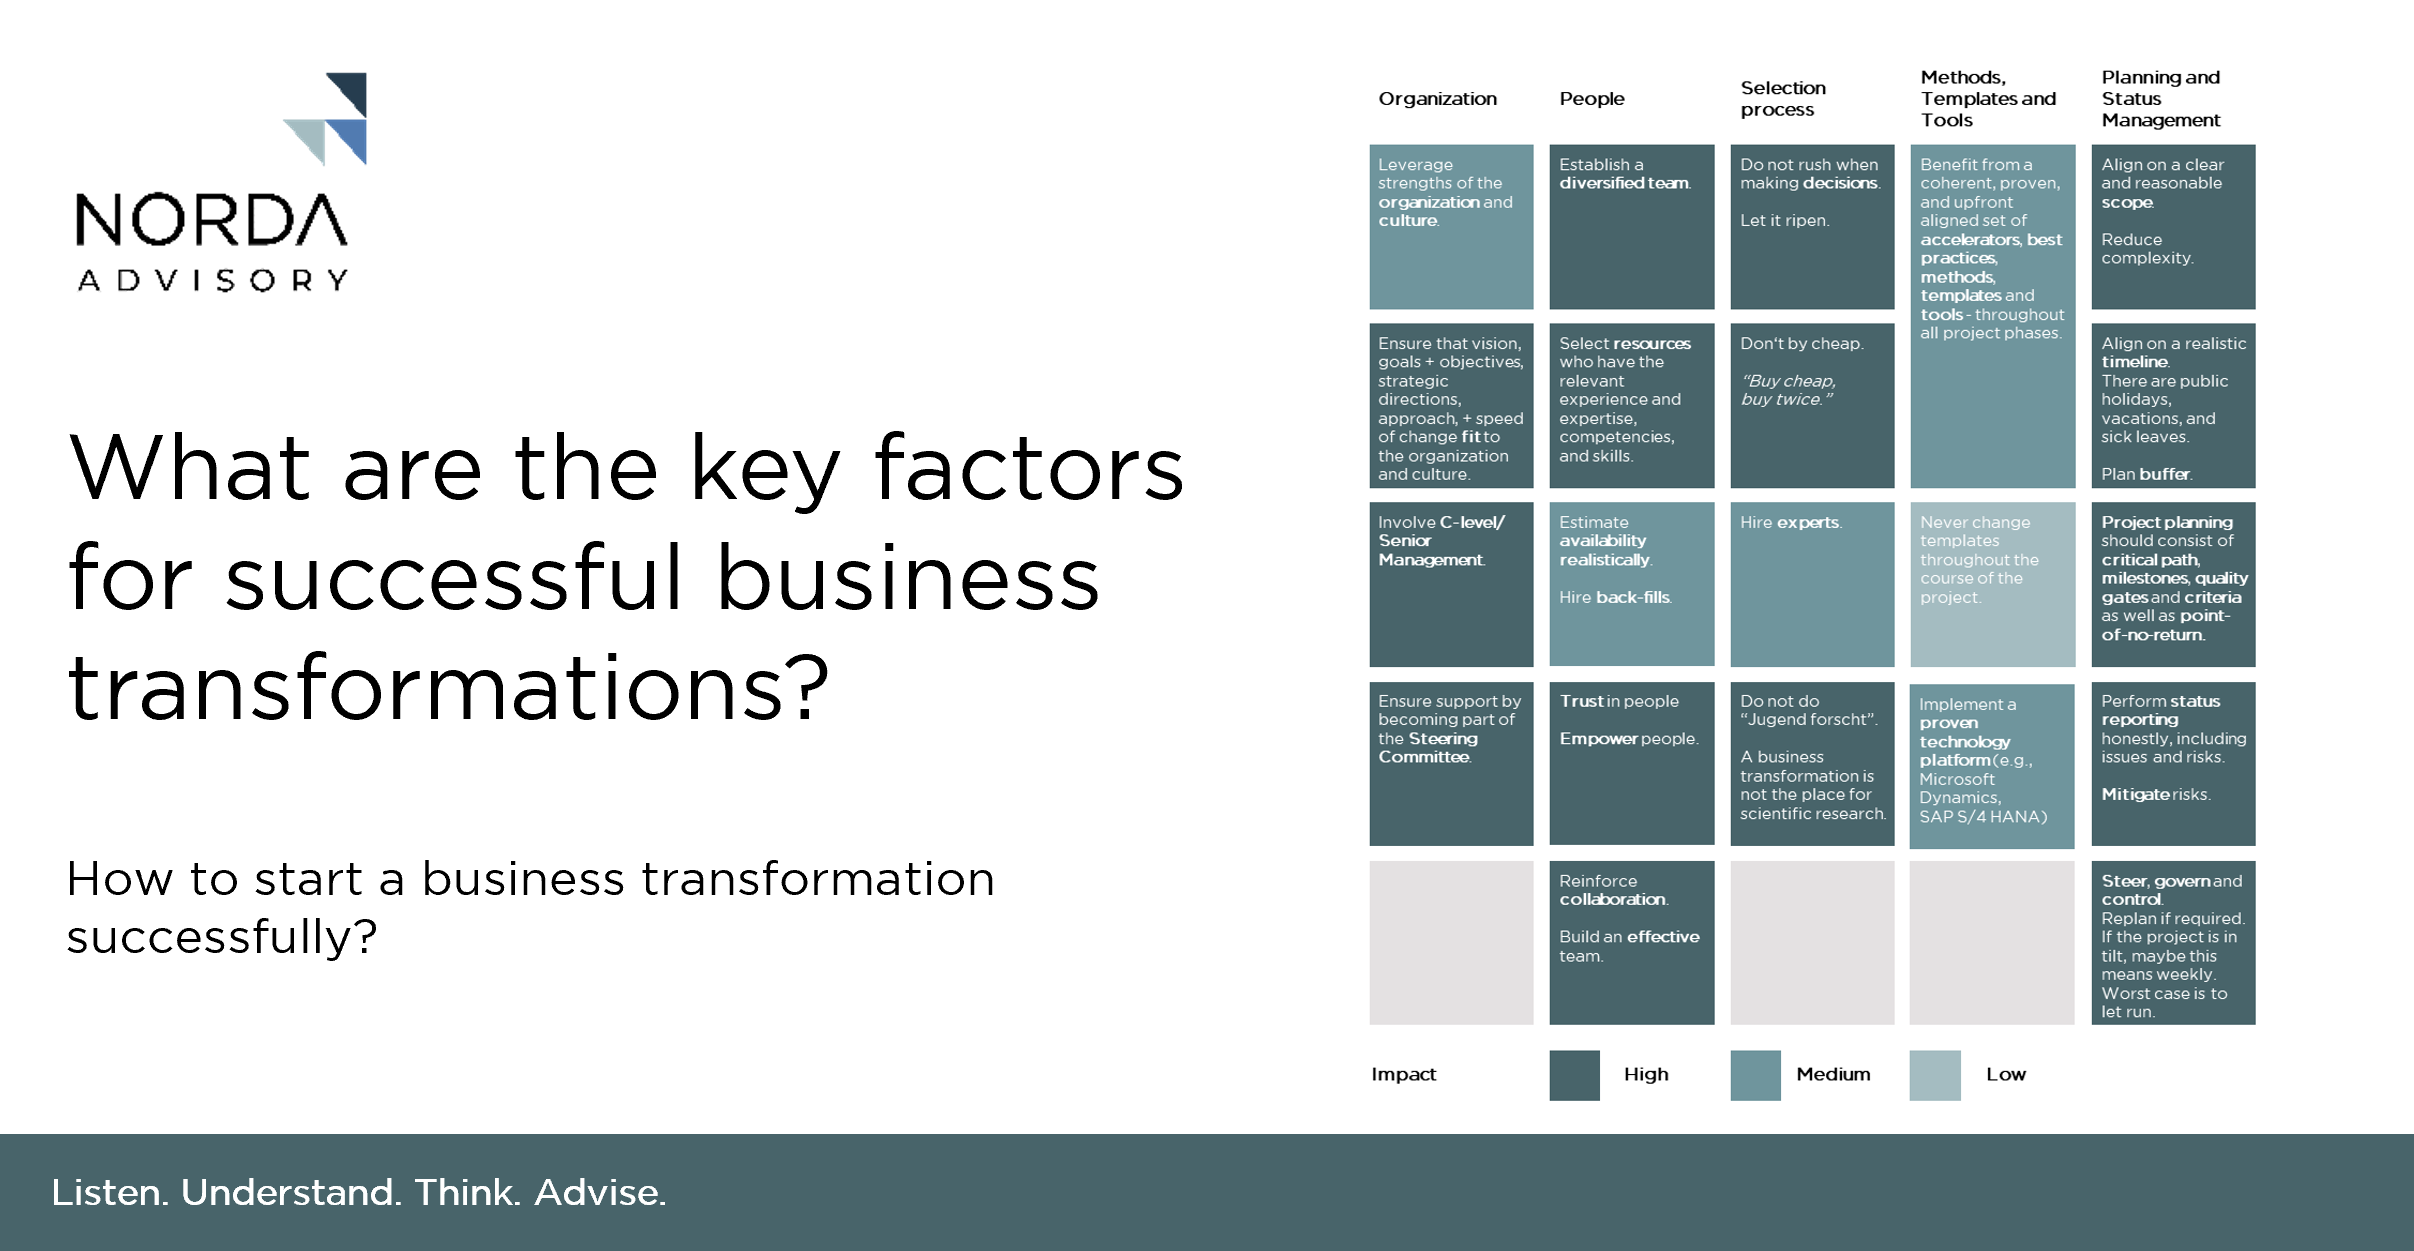 What are the key factors for successful business transformations?